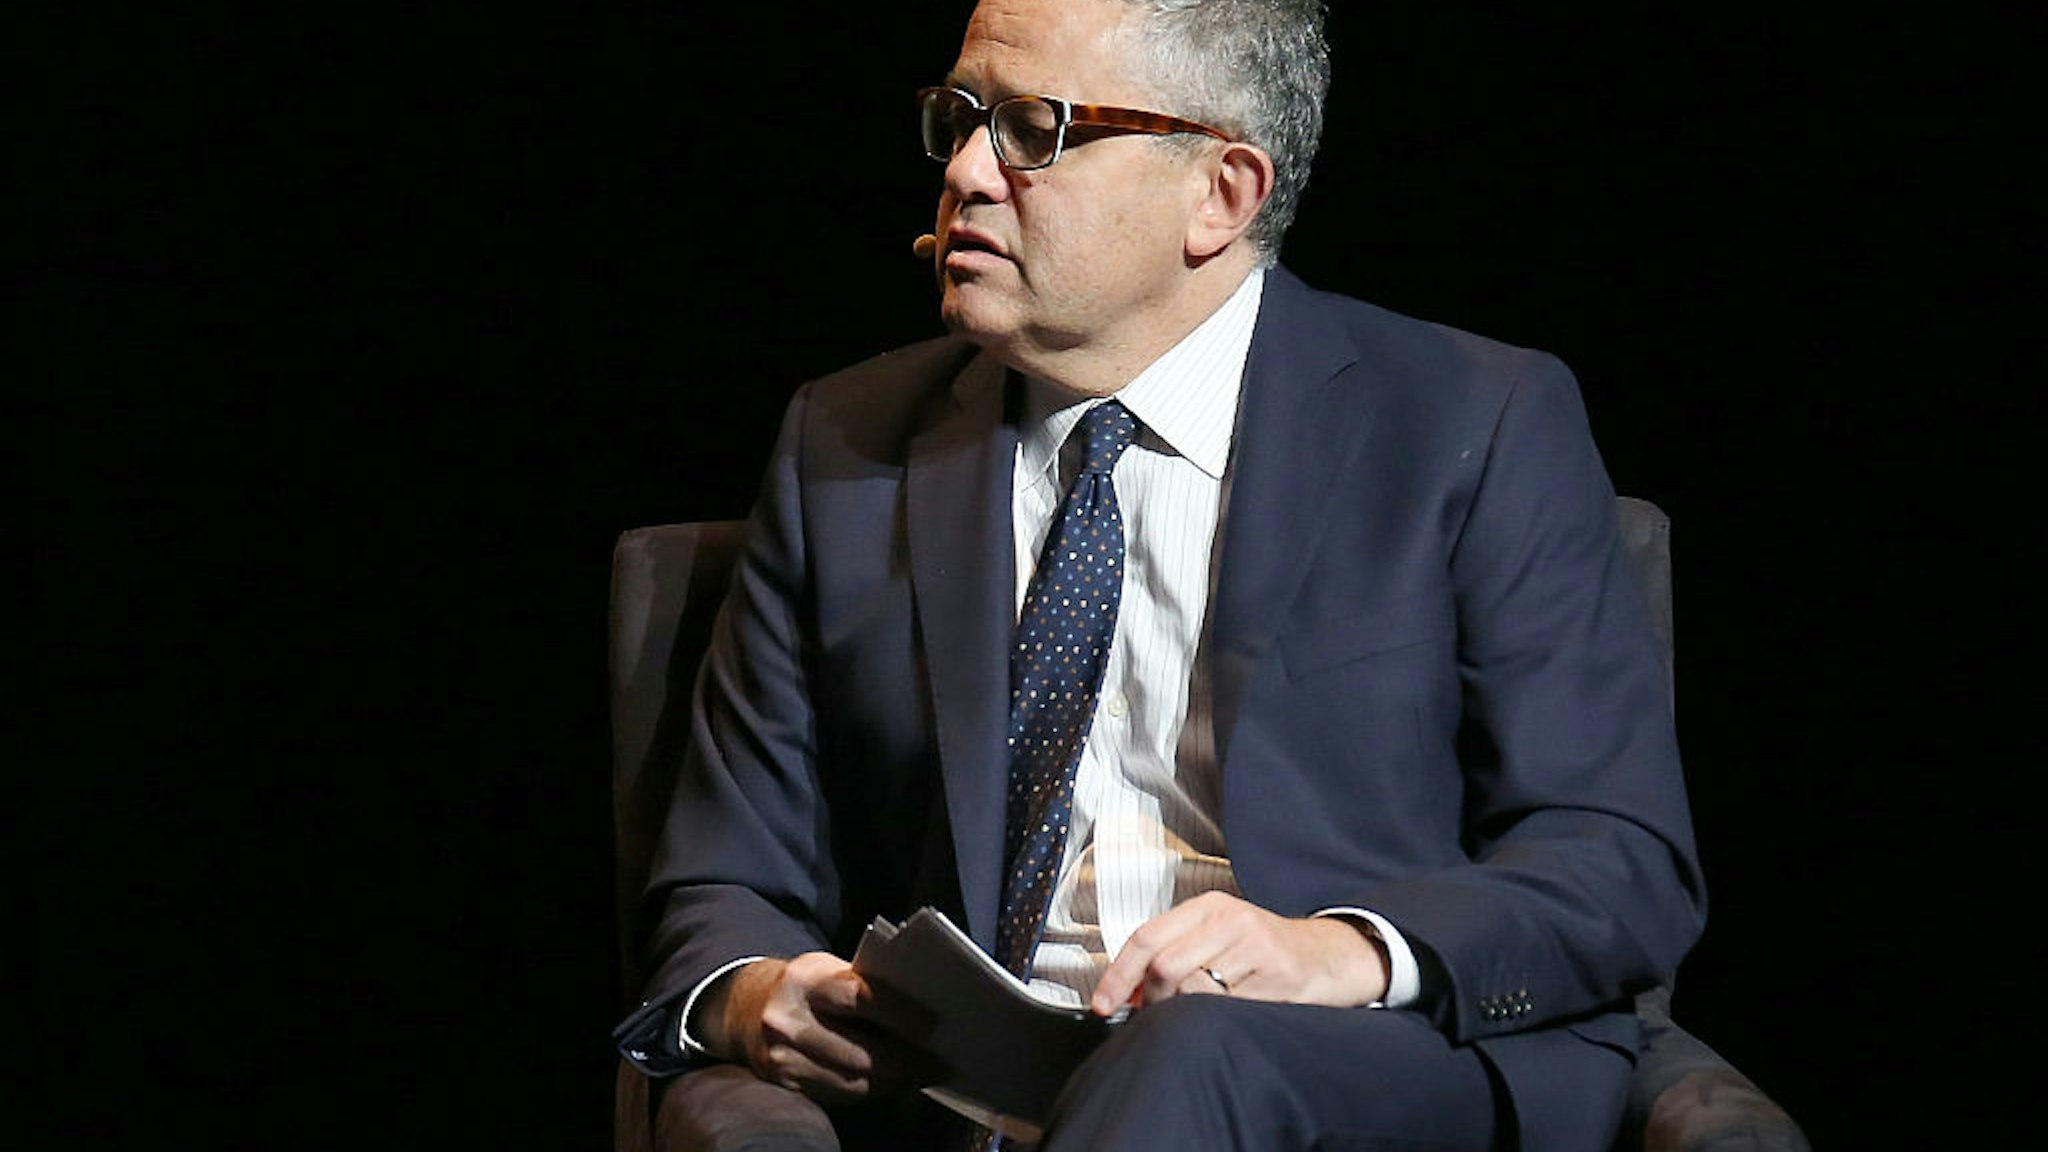 Jeffrey Toobin, Senior Legal Analyst, CNN speaks at the 2016 'Tina Brown Live Media's American Justice Summit' at Gerald W. Lynch Theatre on January 29, 2016 in New York City.